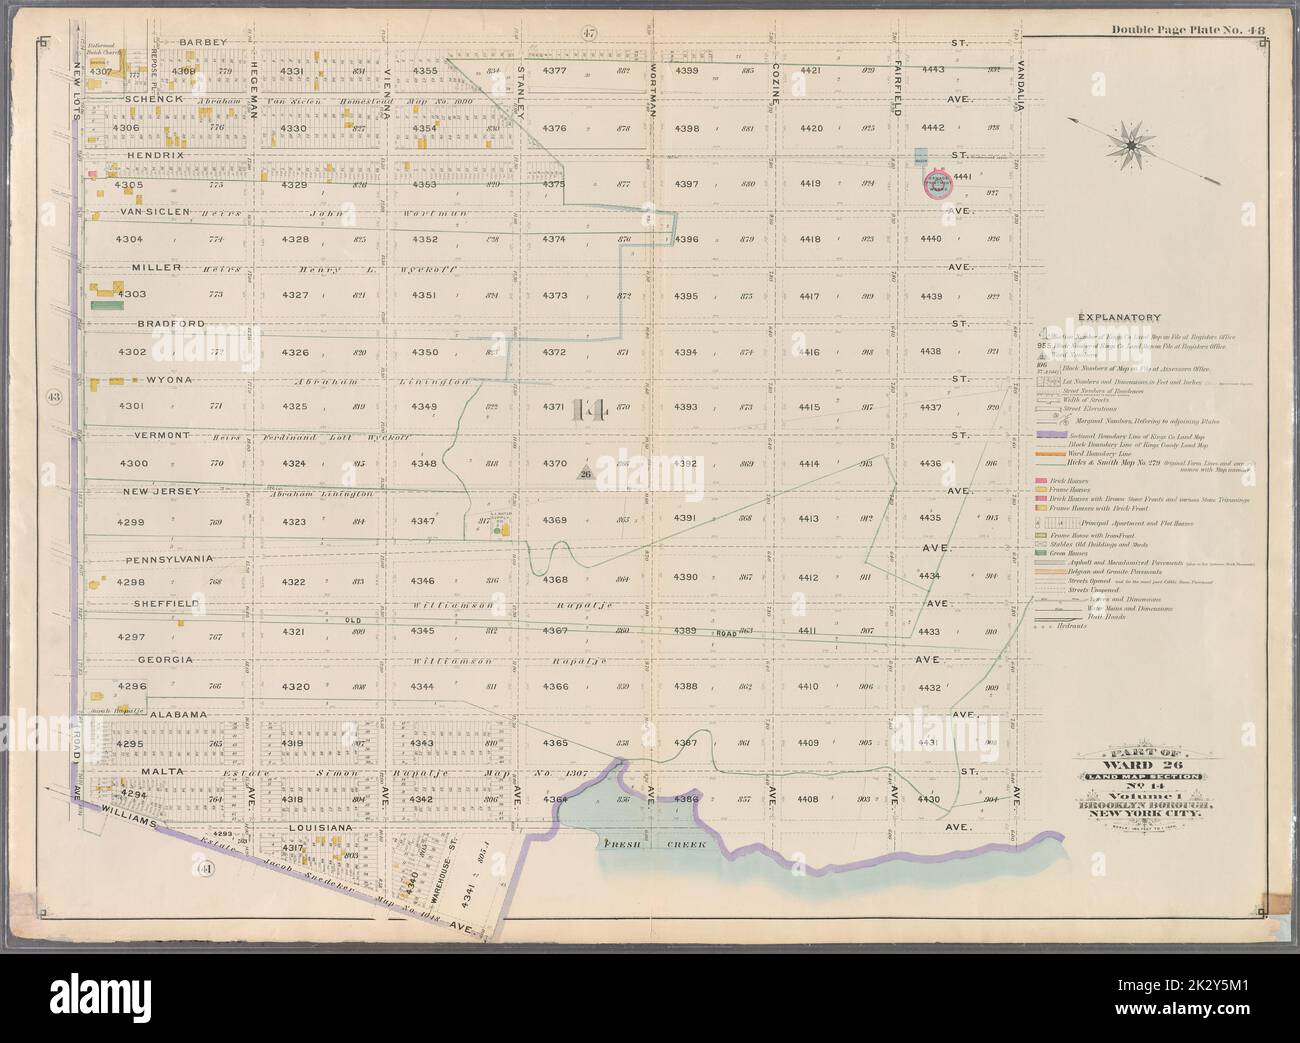 Cartographic, Maps. 1898. Lionel Pincus and Princess Firyal Map Division. Brooklyn (New York, N.Y.), Real property , New York (State) , New York Double Page Plate No. 48: Bounded by Barbey Street, Vandalia Avenue, Louisiana Avenue, Williams Avenue and New Lots Avenue. Part of Ward 26. Land Map Section, No. 14. Volume 1, Brooklyn Borough, New York City. Stock Photo